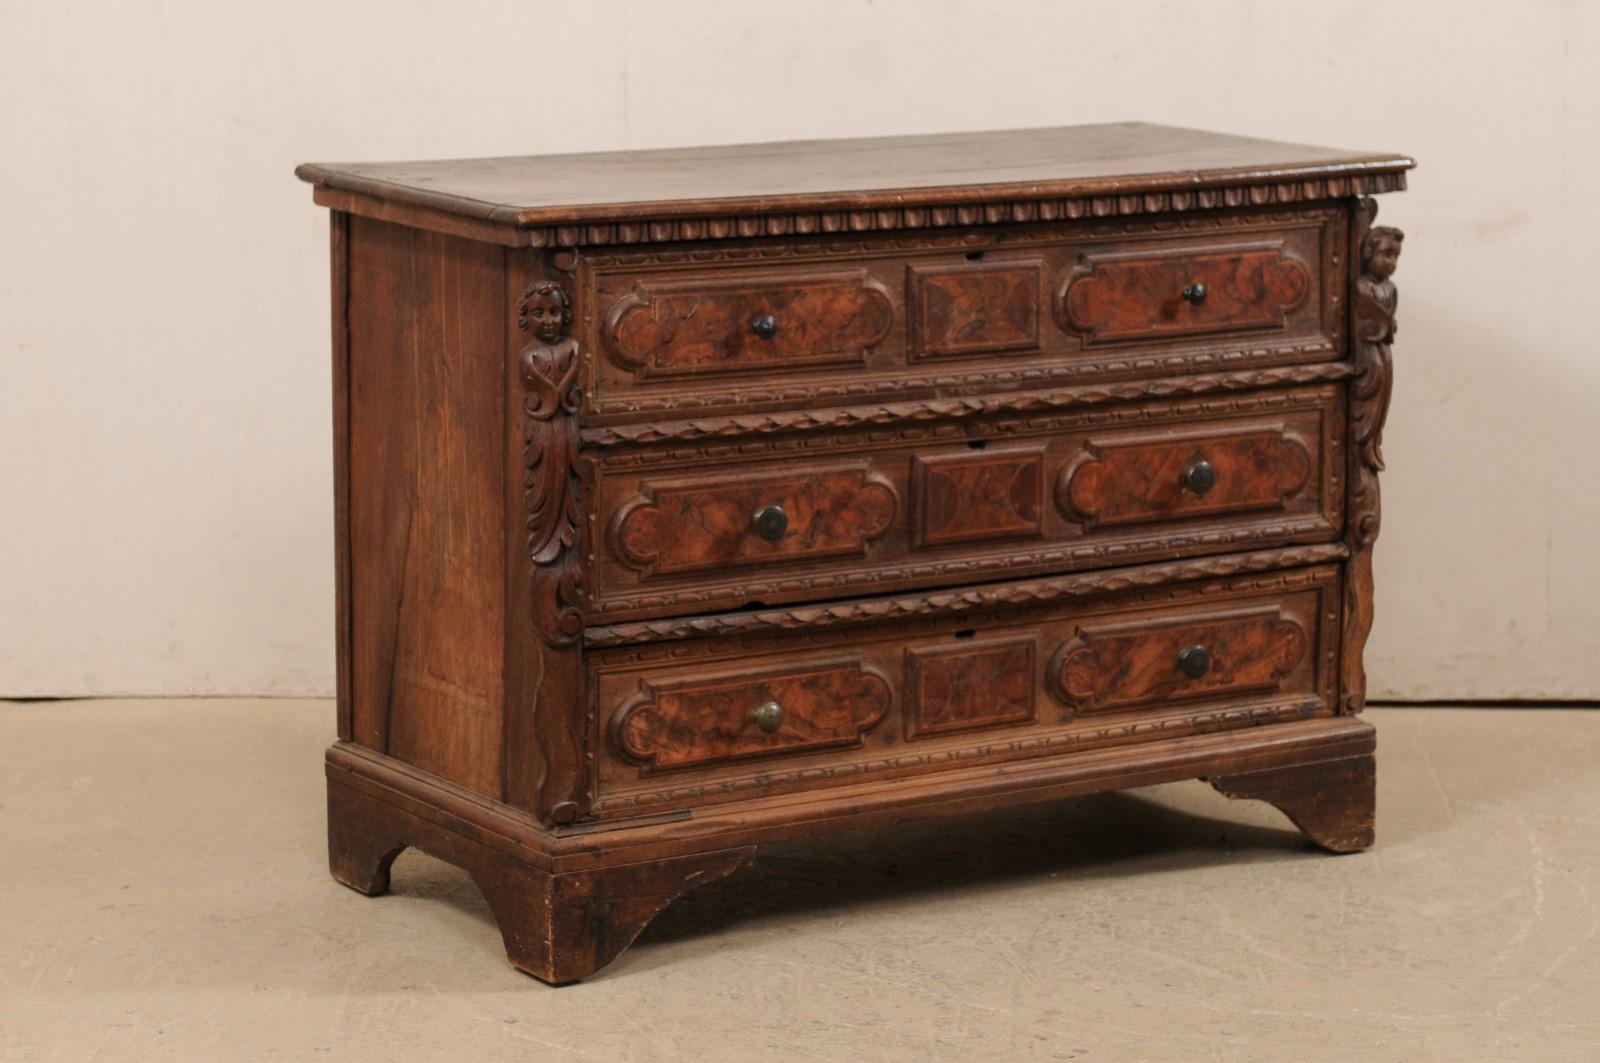 An Italian carved wood chest adorn with putti accents from the 18th century. This antique cassettiera (chest of drawers) from Italy features an egg-and-dart carved trim at the underside of the top edge, and a pair of side posts which are beautifully